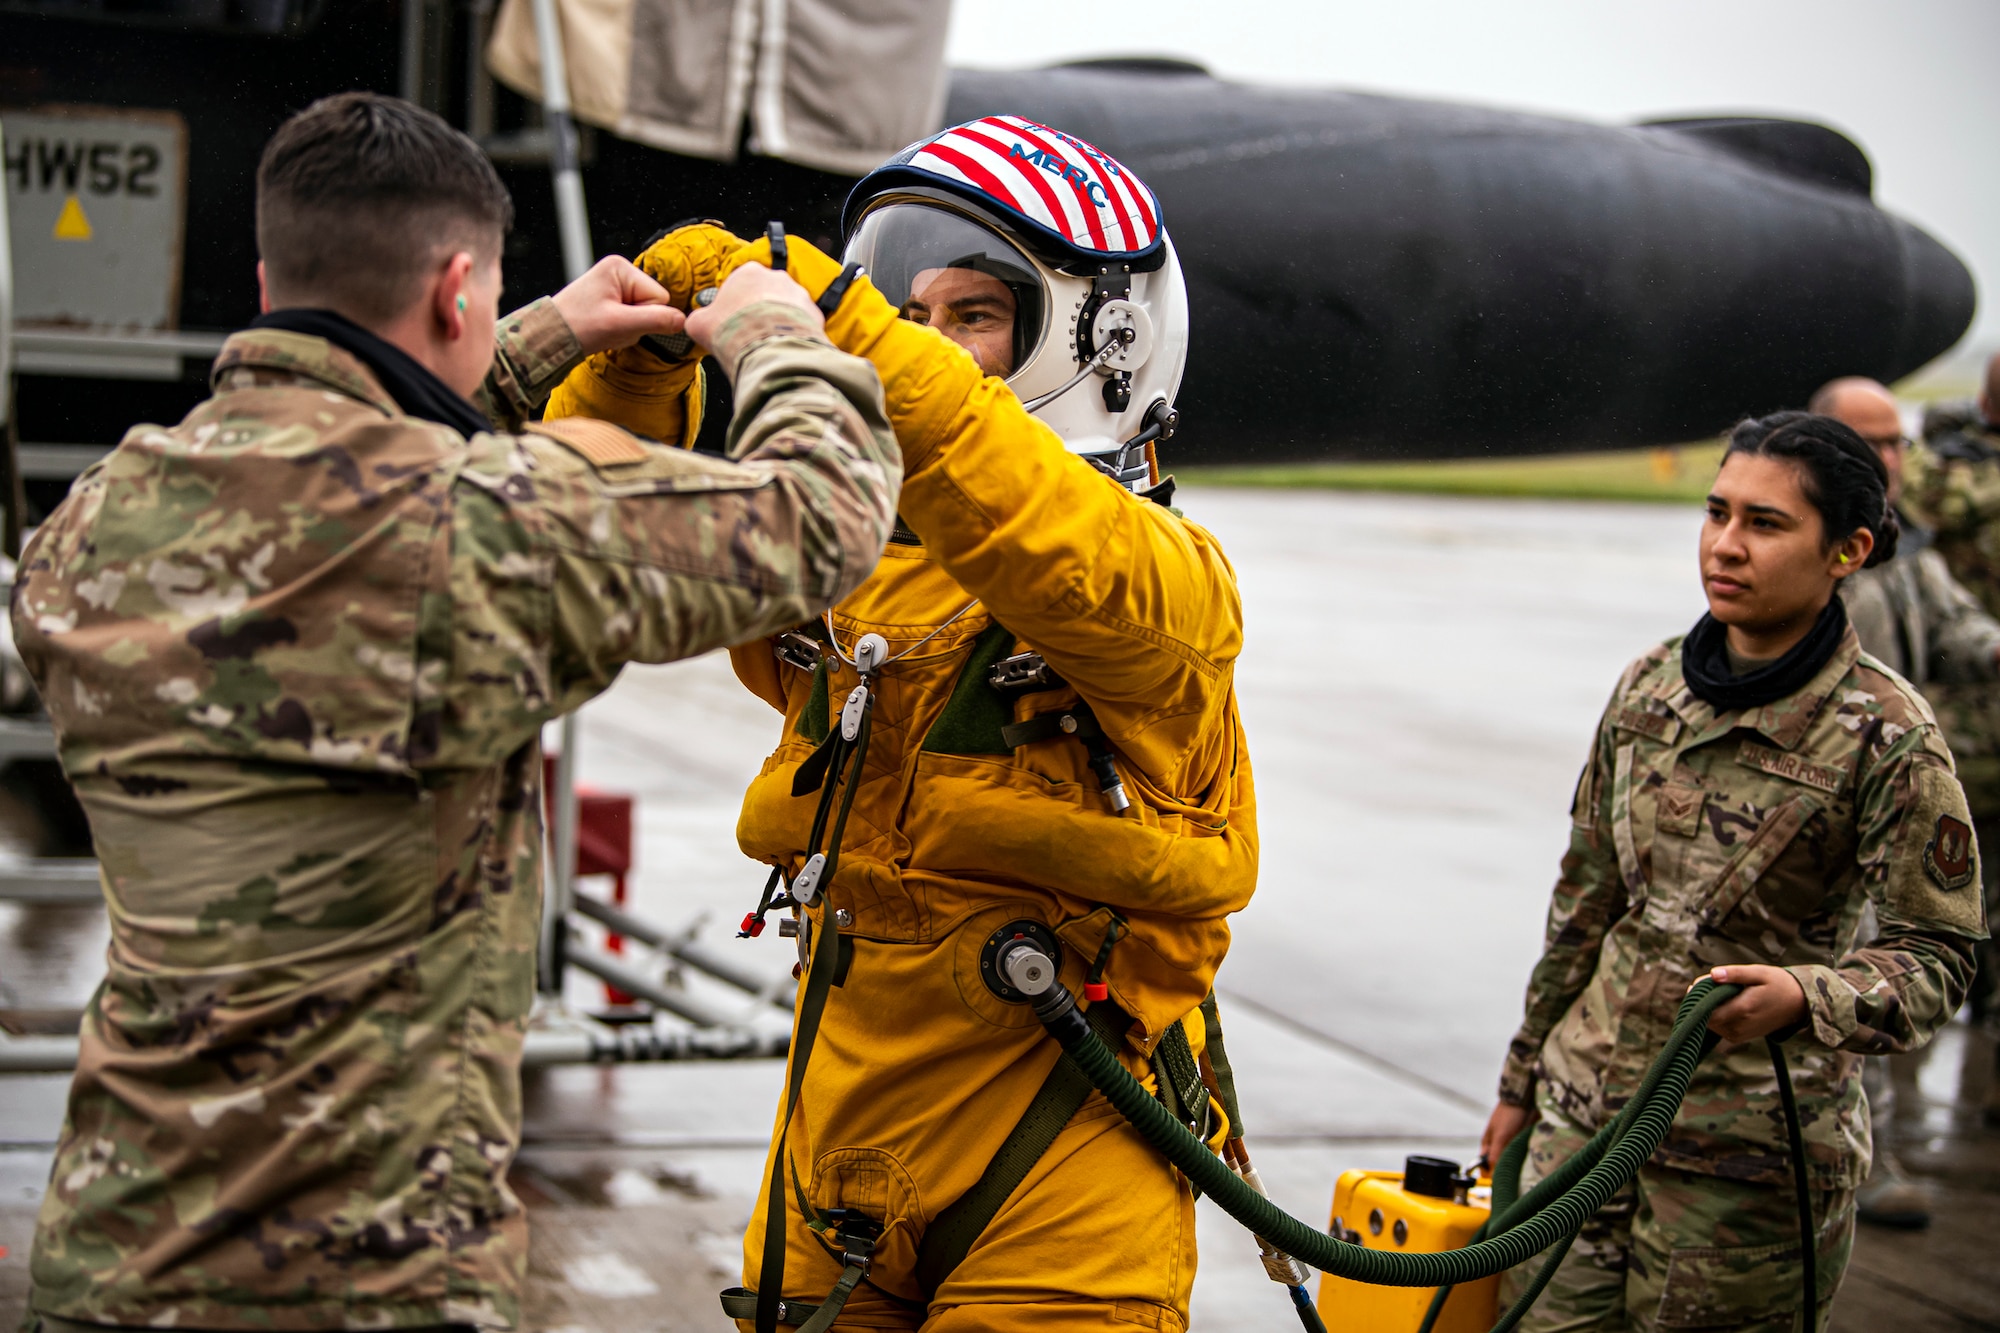 U.S. Air Force Capt. Joshua Hall, center, 99th Reconnaissance Squadron U-2 Dragon Lady pilot, fist bumps an Airman from the 99th Expeditionary Reconnaissance Squadron prior to takeoff at RAF Fairford, July 8, 2020. The U-2 aircraft assigned to the 9th Reconnaissance Wing, Beale Air Force Base, Calif., are currently deployed to RAF Fairford as part of the 99th ERS. The aircraft supplements a variety of missions that enhance regional and global security in support of U.S. and NATO allies and regional partners. The U.S. Air Force is engaged, postured and ready with credible force to assure, deter and defend in an increasingly complex security environment. (U.S. Air Force photo by Senior Airman Eugene Oliver)